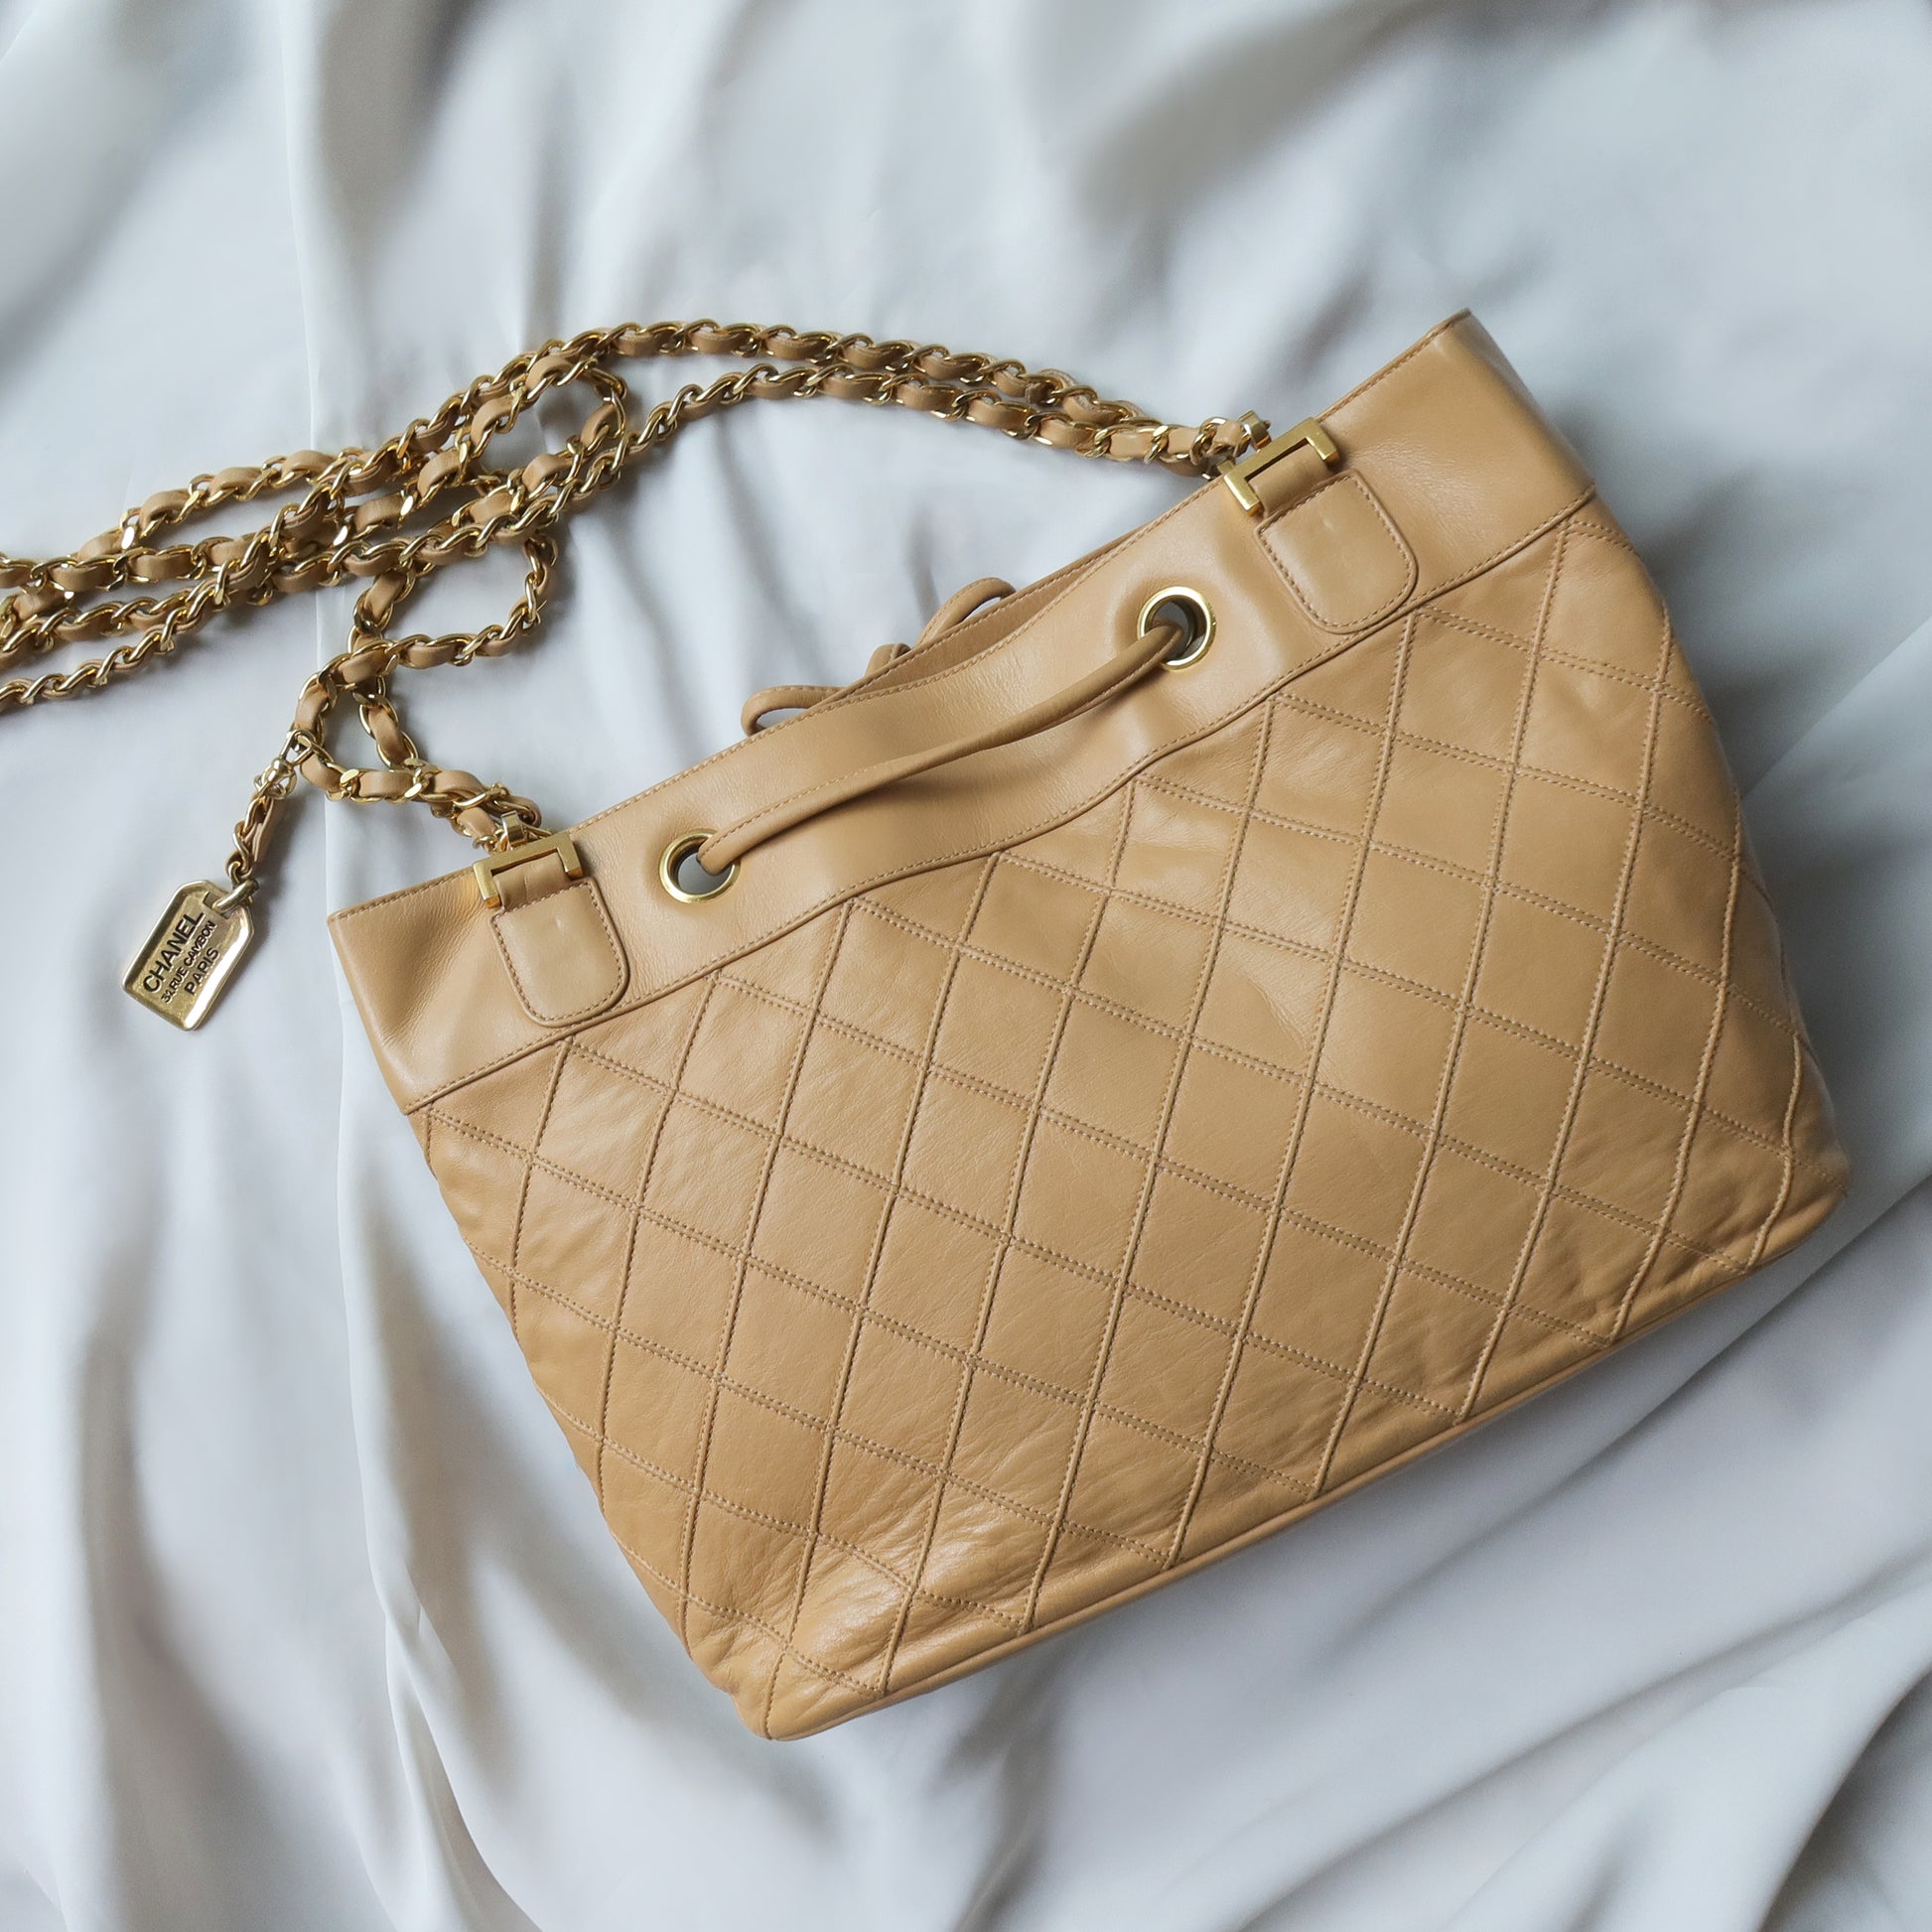 chanel quilted tote bag